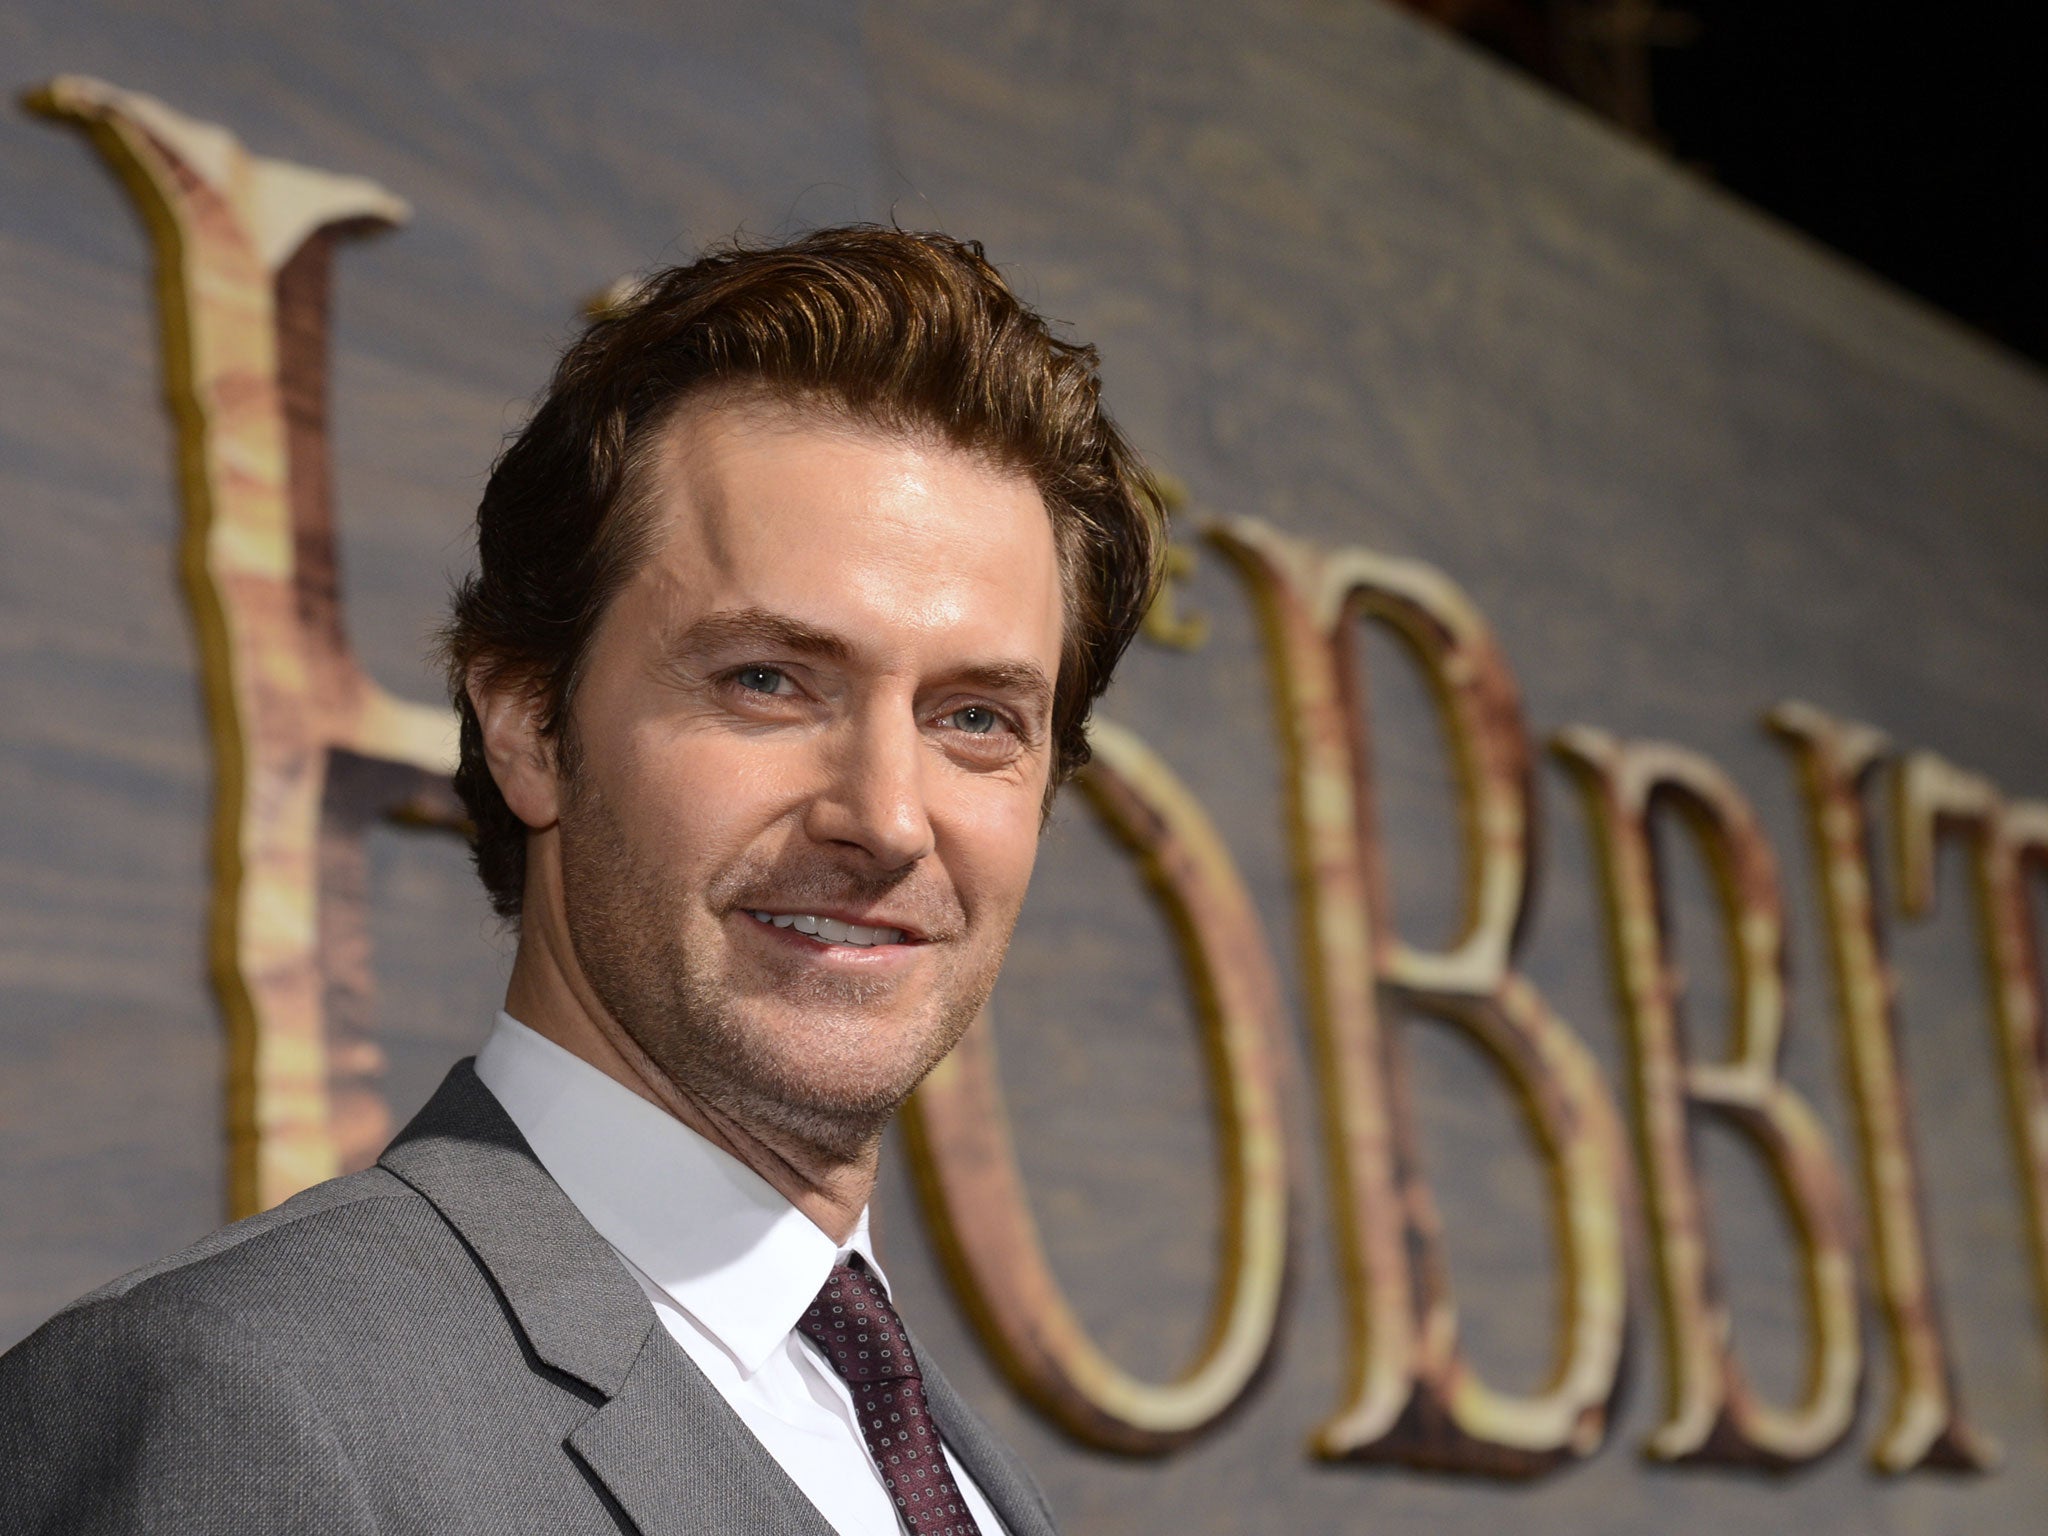 Richard Armitage attends the December 2013 premiere of The Hobbit: The Desolation of Smaug in Los Angeles